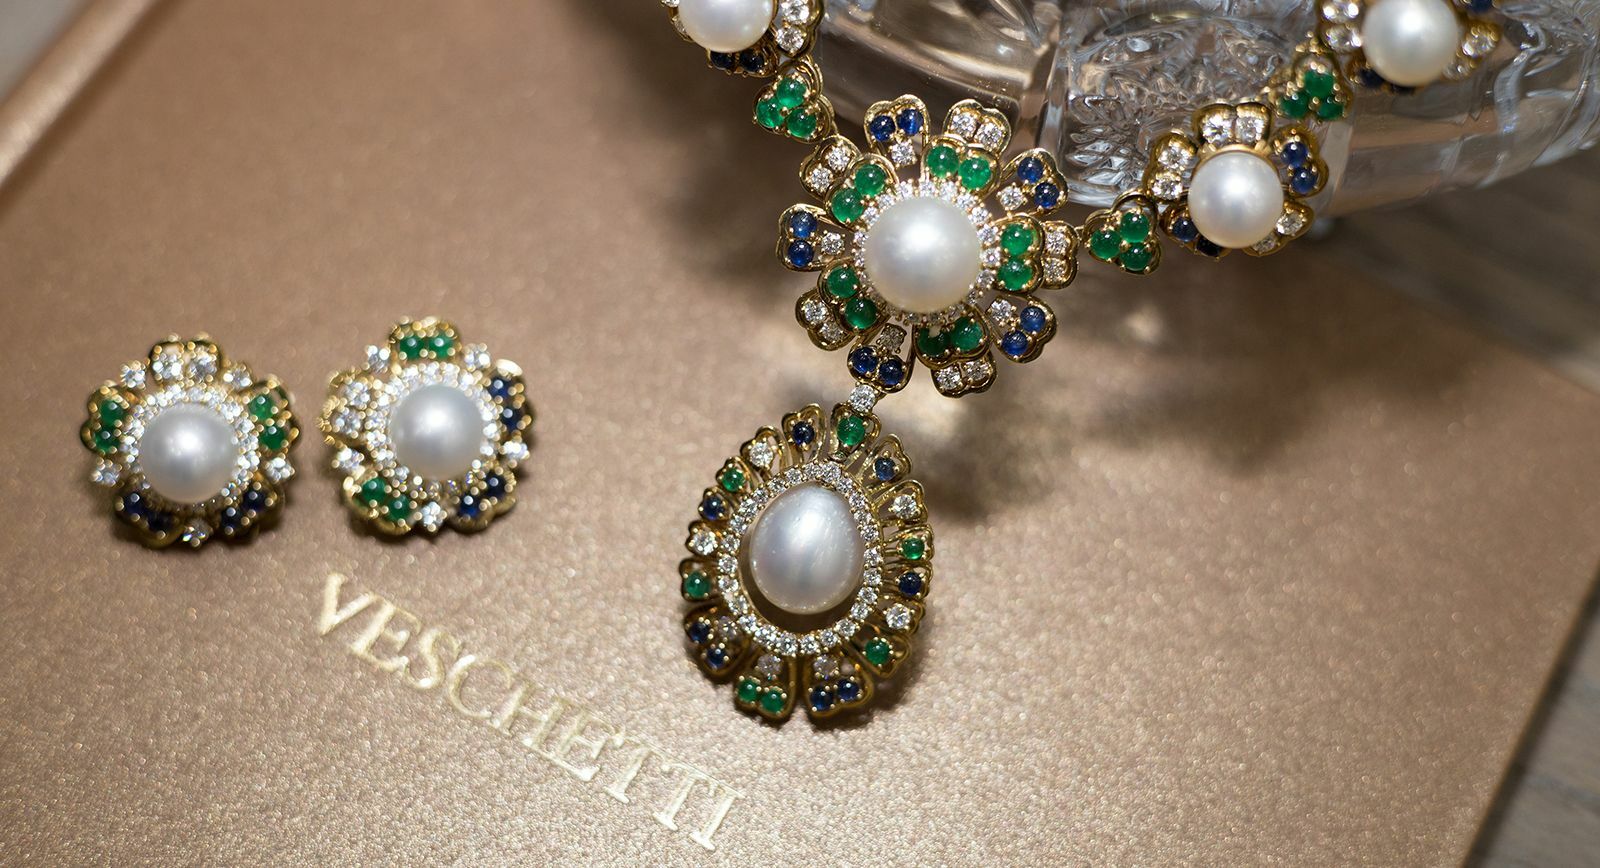 Veschetti necklace and earrings with pearls, coloured gemstones and diamonds